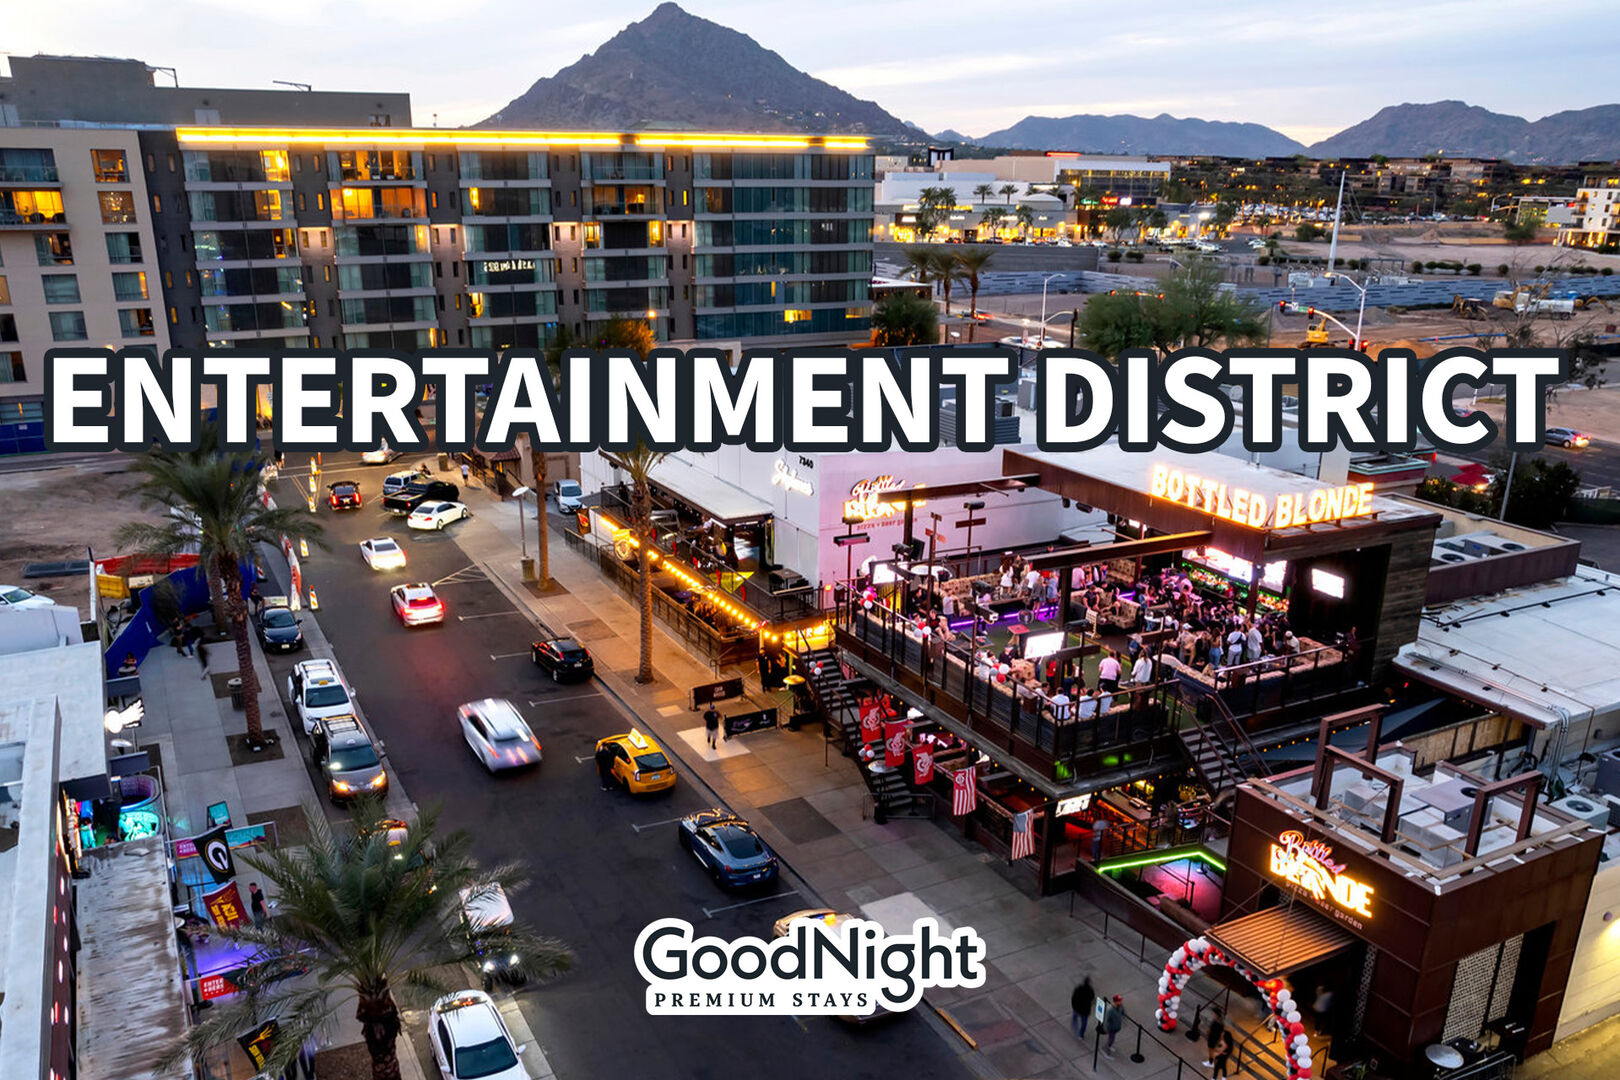 21 mins: The Entertainment District - Valley Nightlife